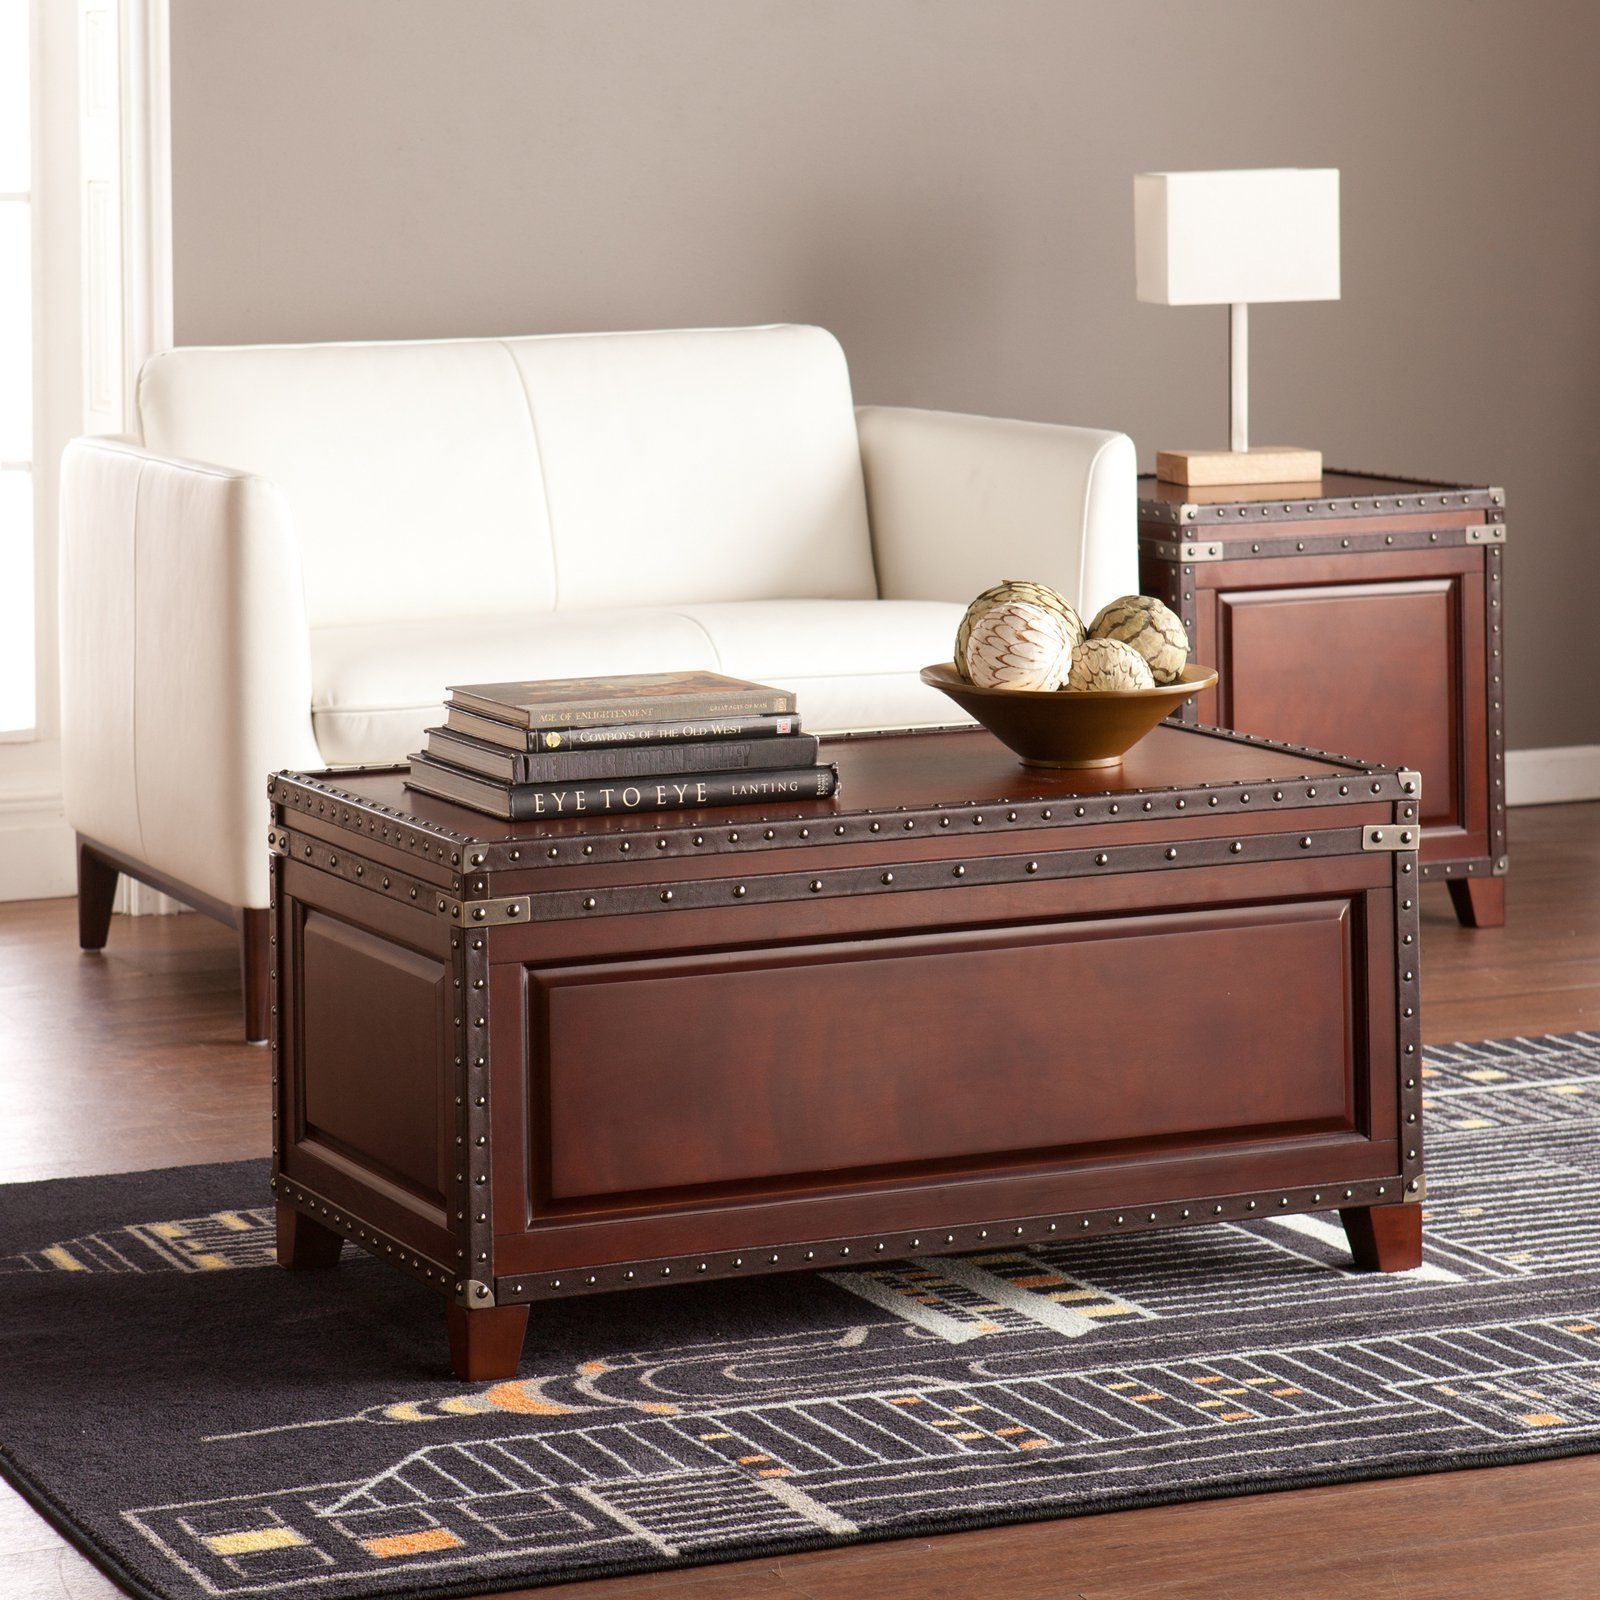 Southern Enterprises Amherst Trunk Coffee Table | From Hayneedle Within Southern Enterprises Larksmill Coffee Tables (Photo 3 of 15)